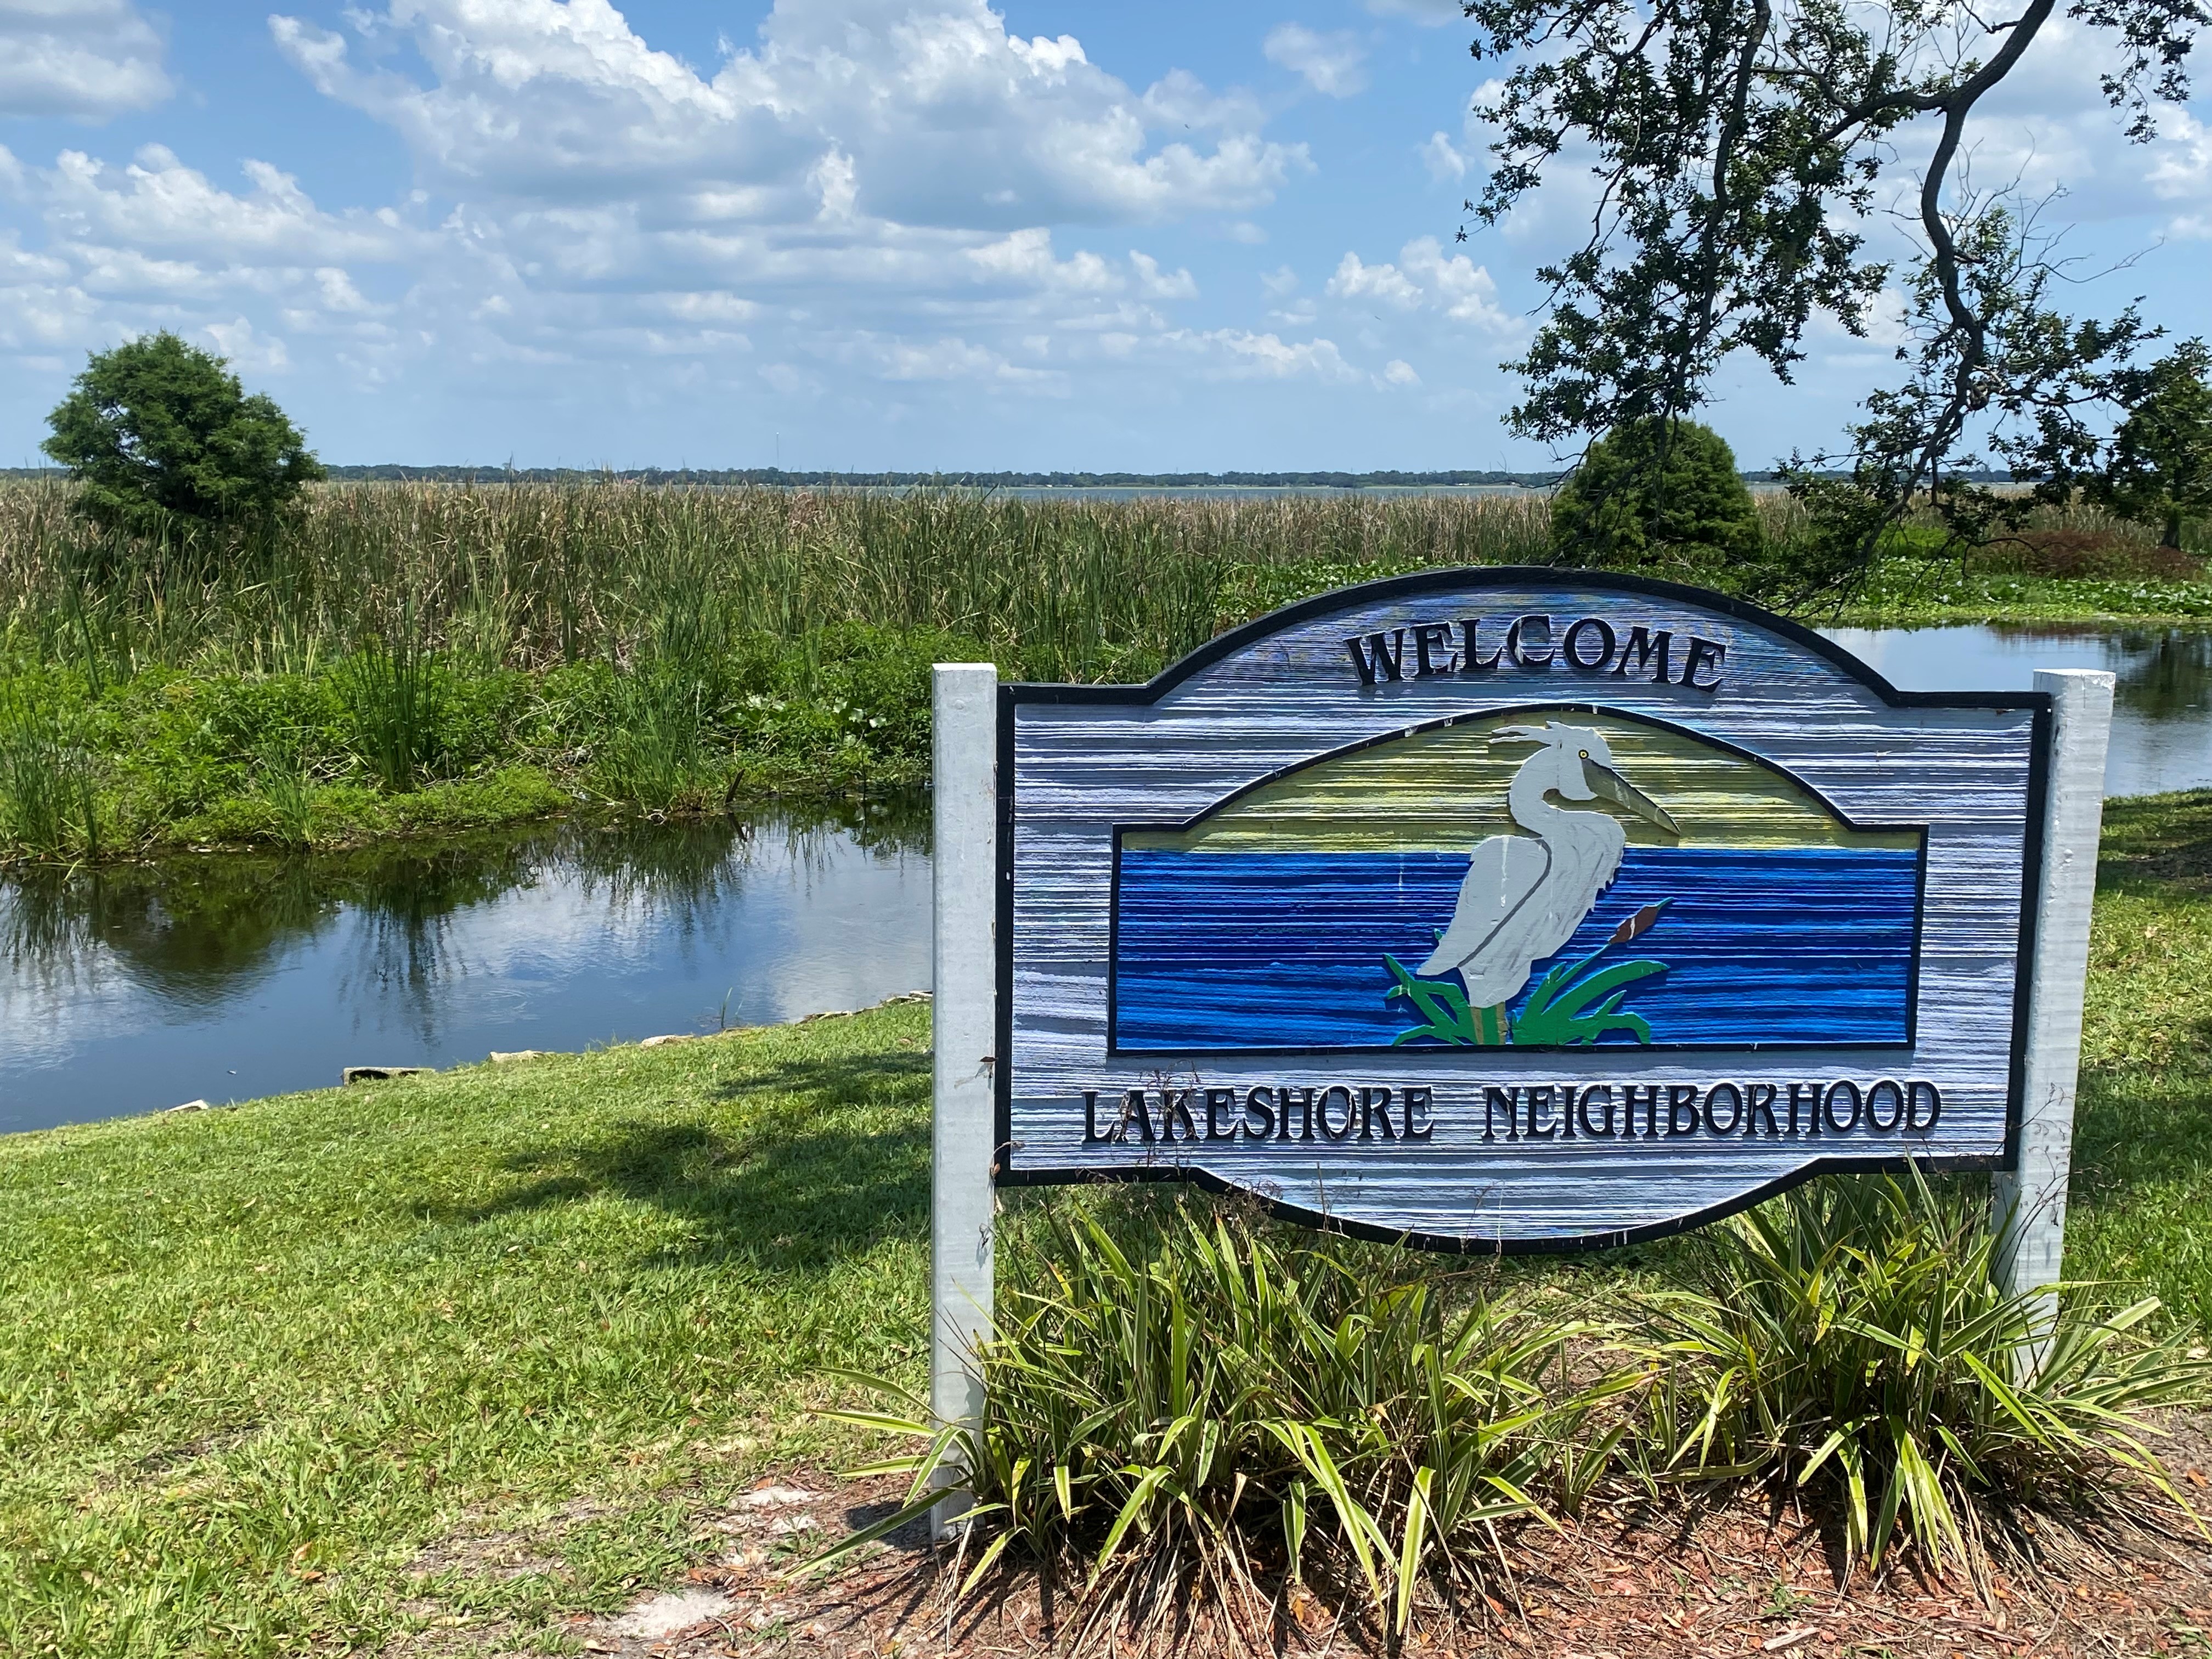 A sign welcoming you to the Lakeshore Neighborhood, sitting in front of Lake Parker.